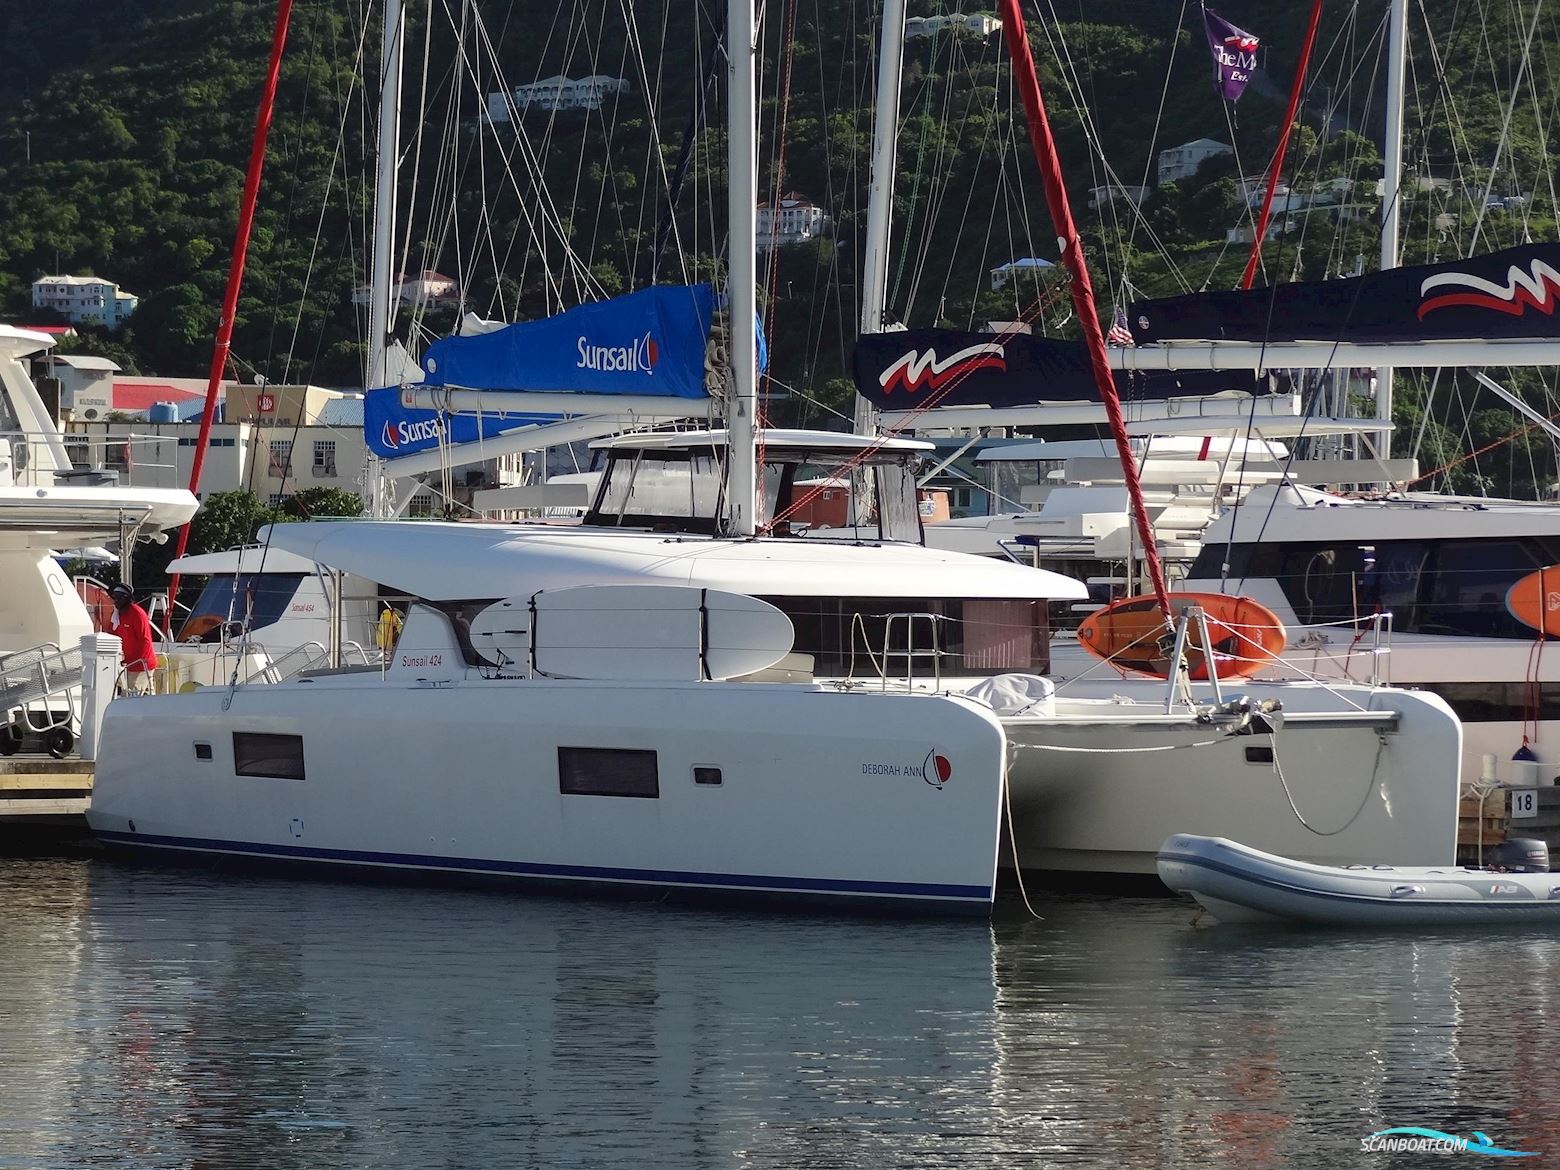 Lagoon 42 Multi hull boat 2020, with Yanmar engine, No country info